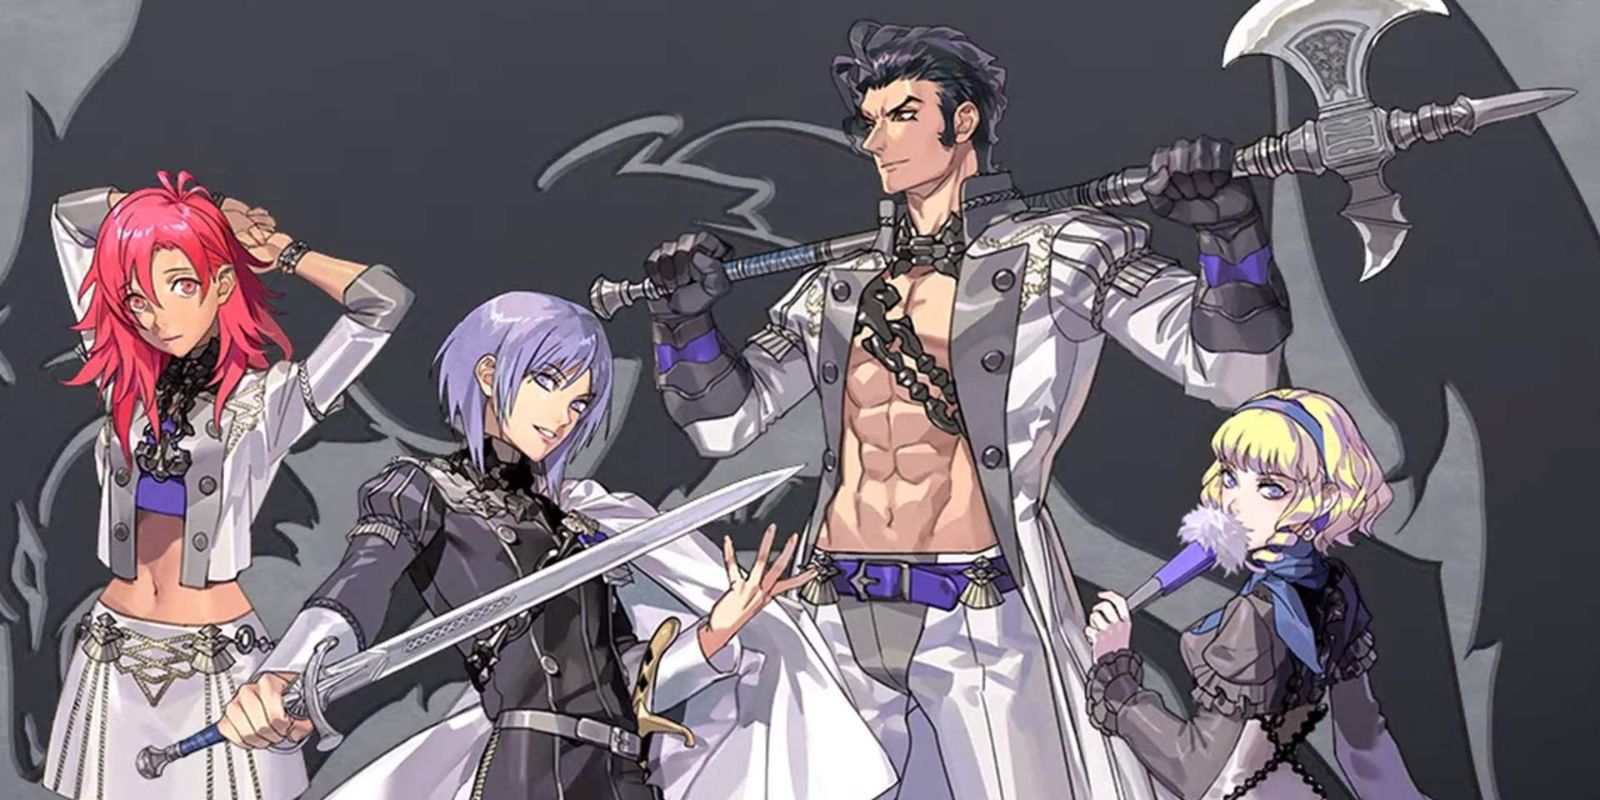 Fire Emblem: Here's What Three Houses' DLC Gets You (And If It's Worth It)